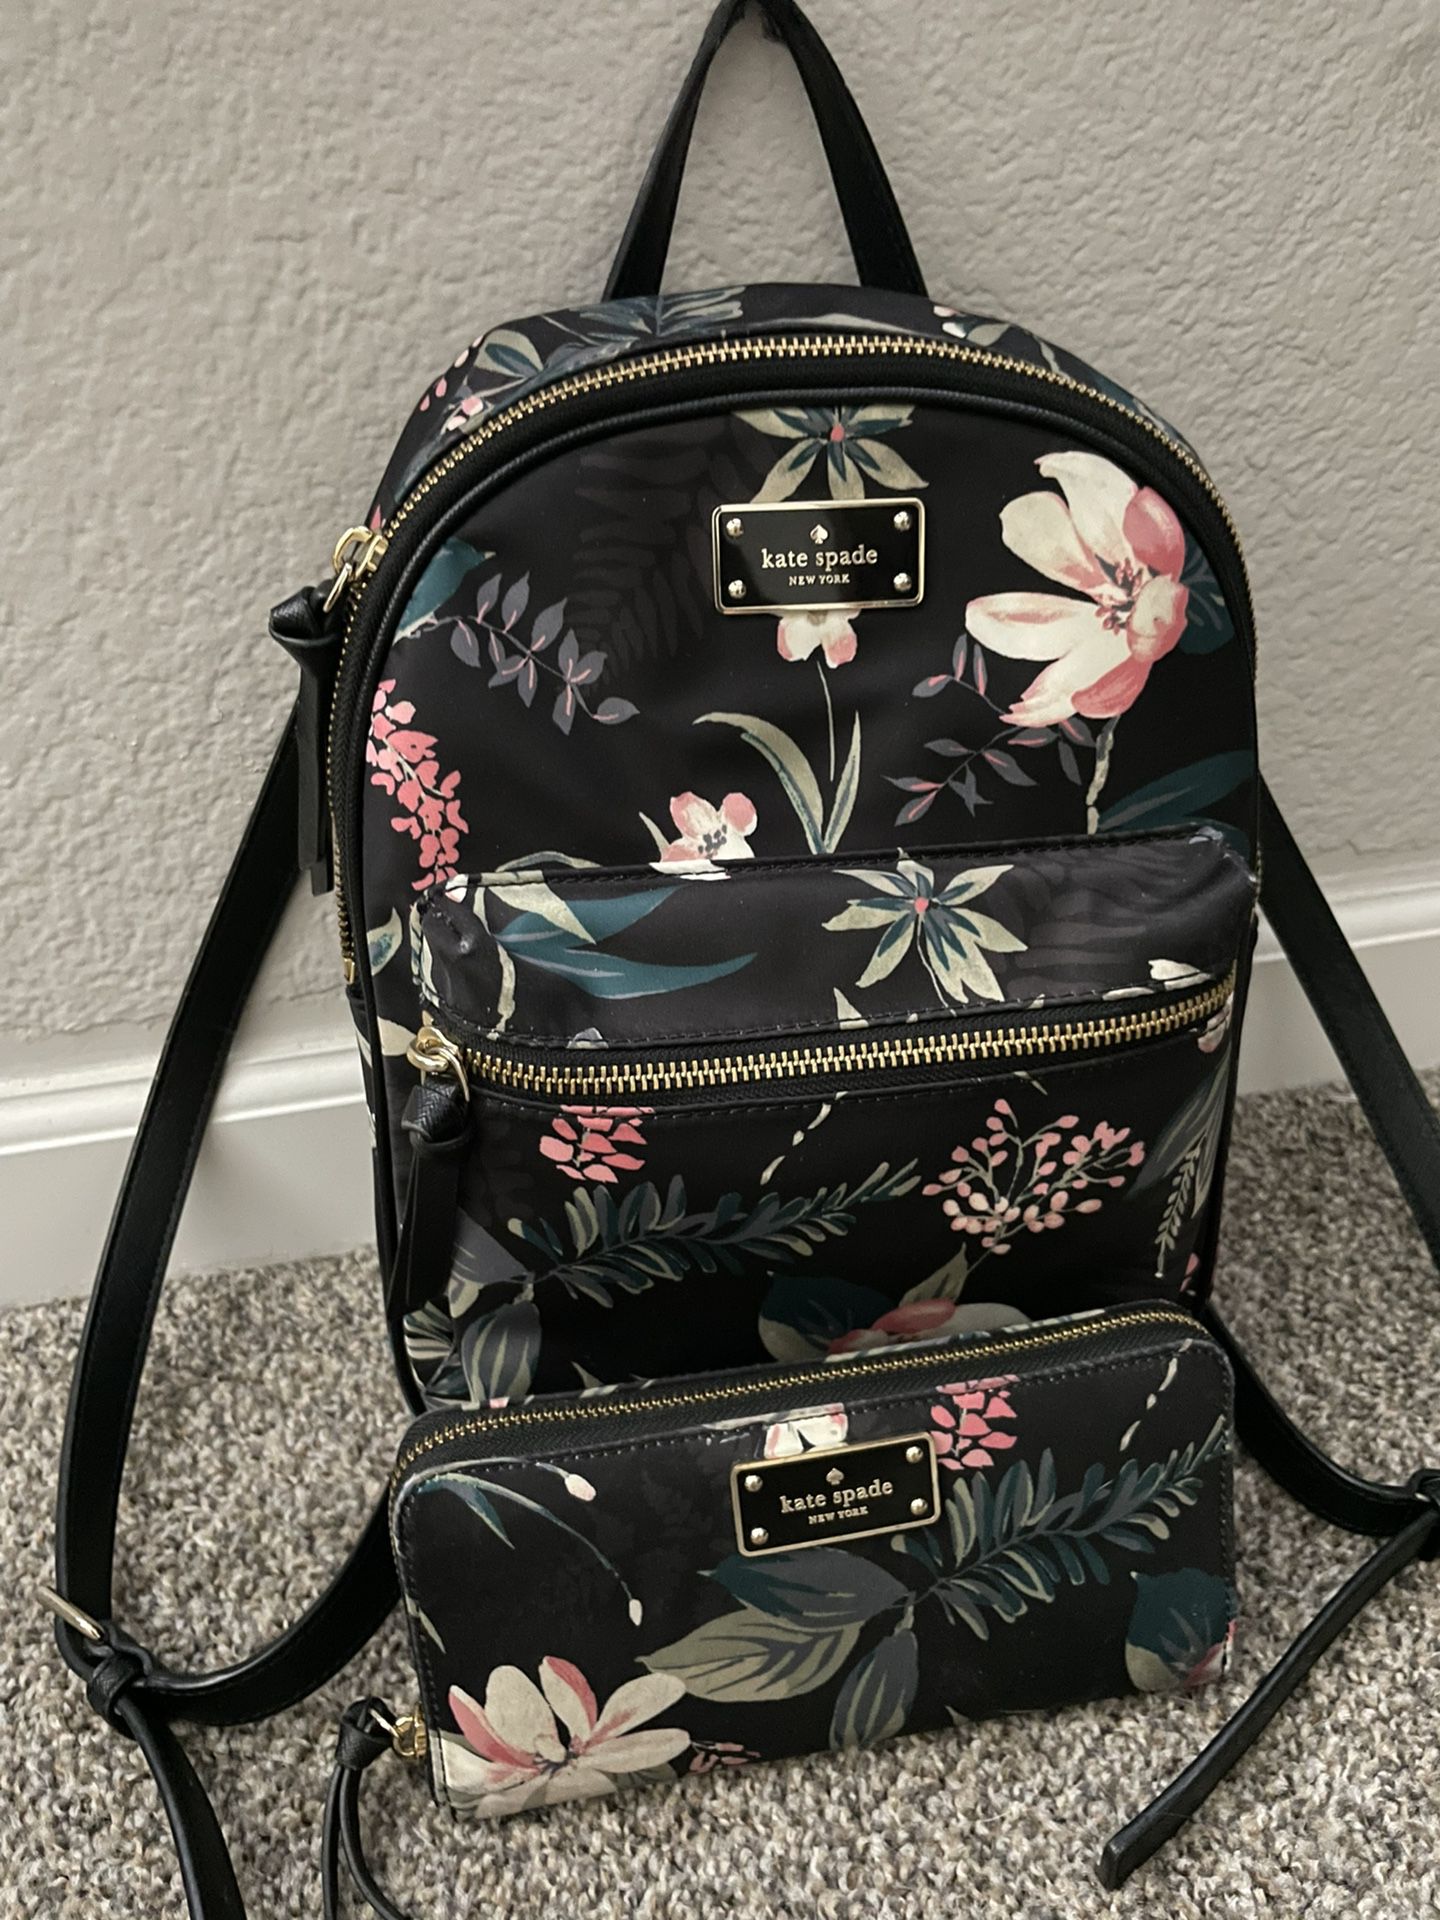 Kate Spade Mini Floral Backpack for Sale in Henderson, NV - OfferUp